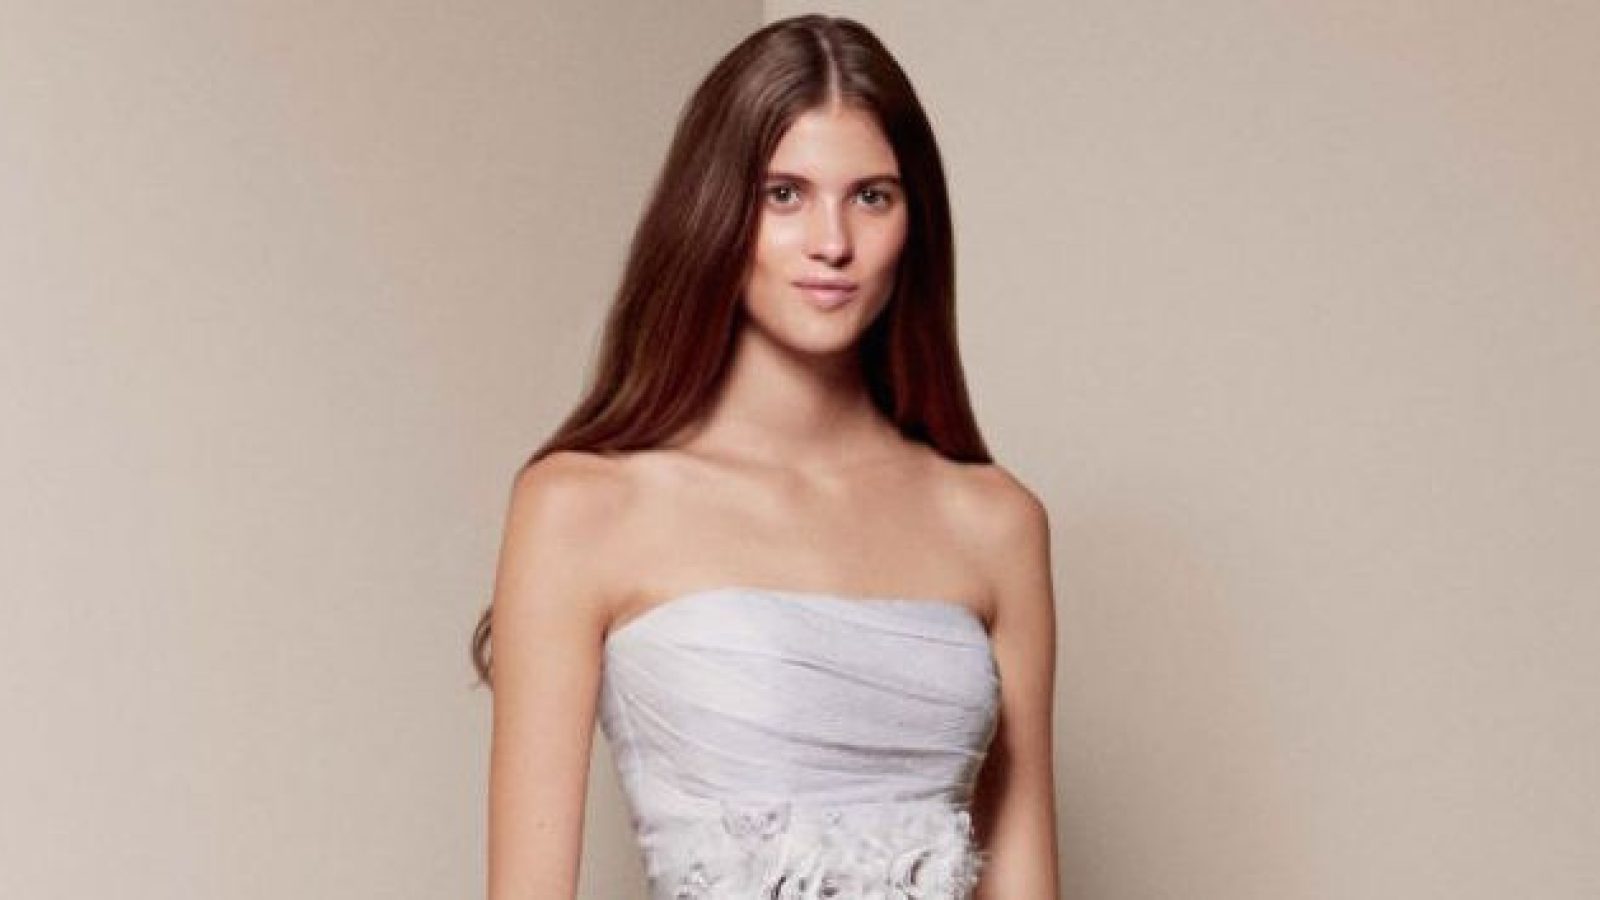 The 1 Best Selling Wedding Dress At Davids Bridal Is A Flowy Dream